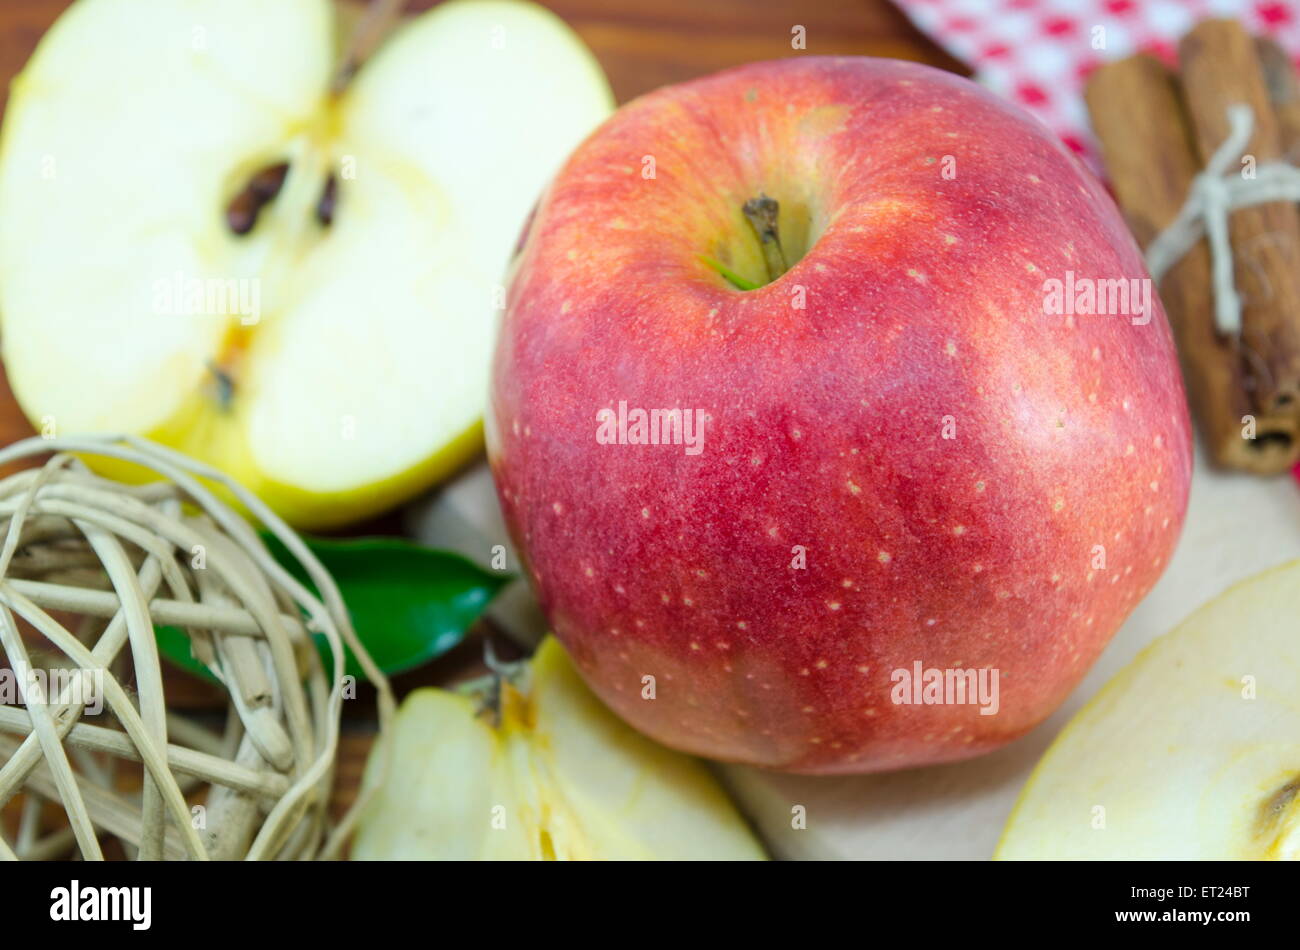 Halved and whole red apple on a table with a handmade decoration Stock Photo